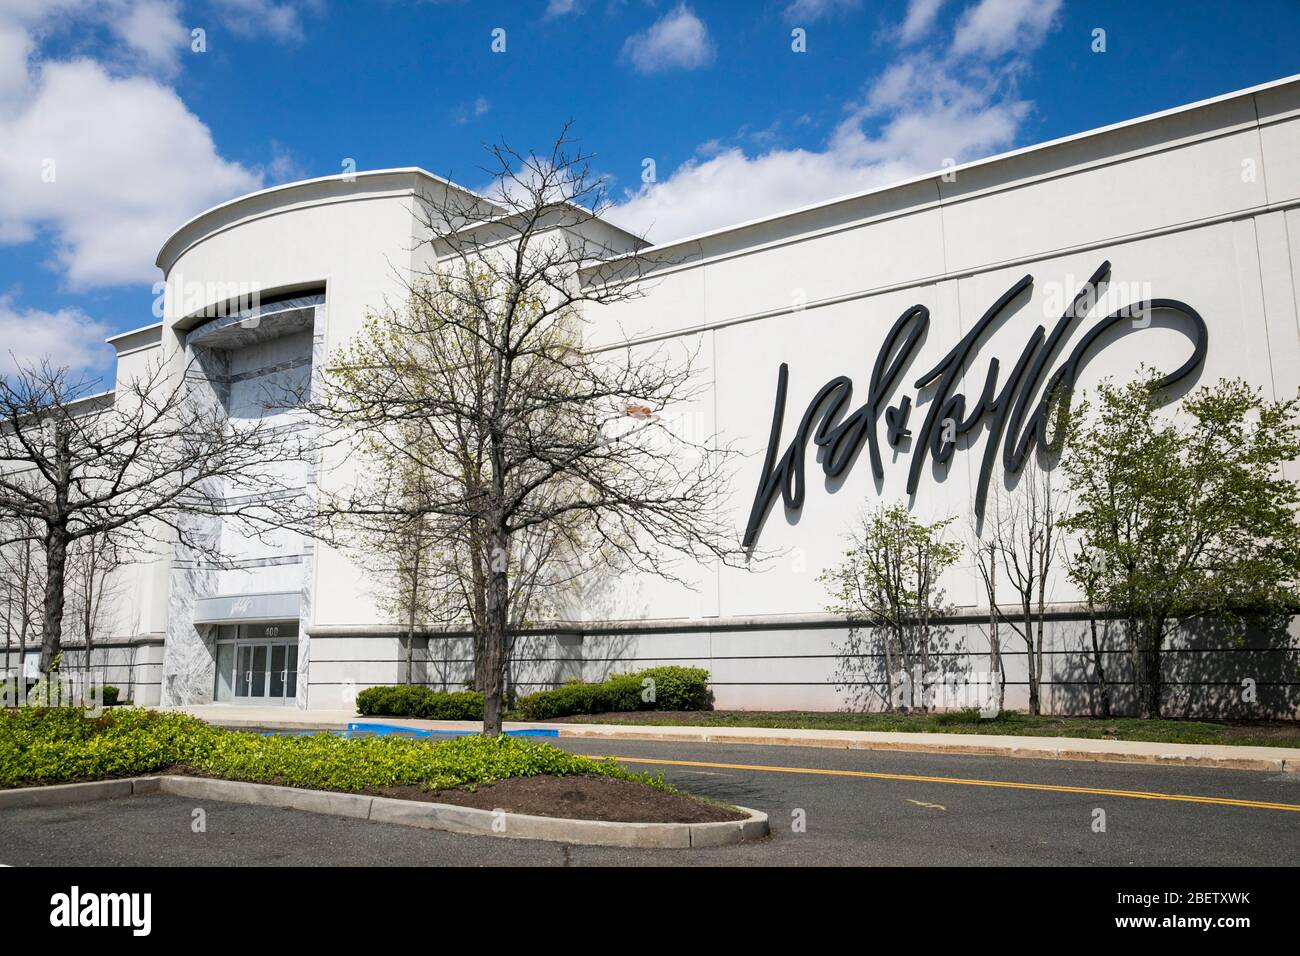 https://c8.alamy.com/comp/2BETXWK/a-logo-sign-outside-of-a-lord-taylor-retail-store-location-in-cherry-hill-new-jersey-on-april-11-2020-2BETXWK.jpg